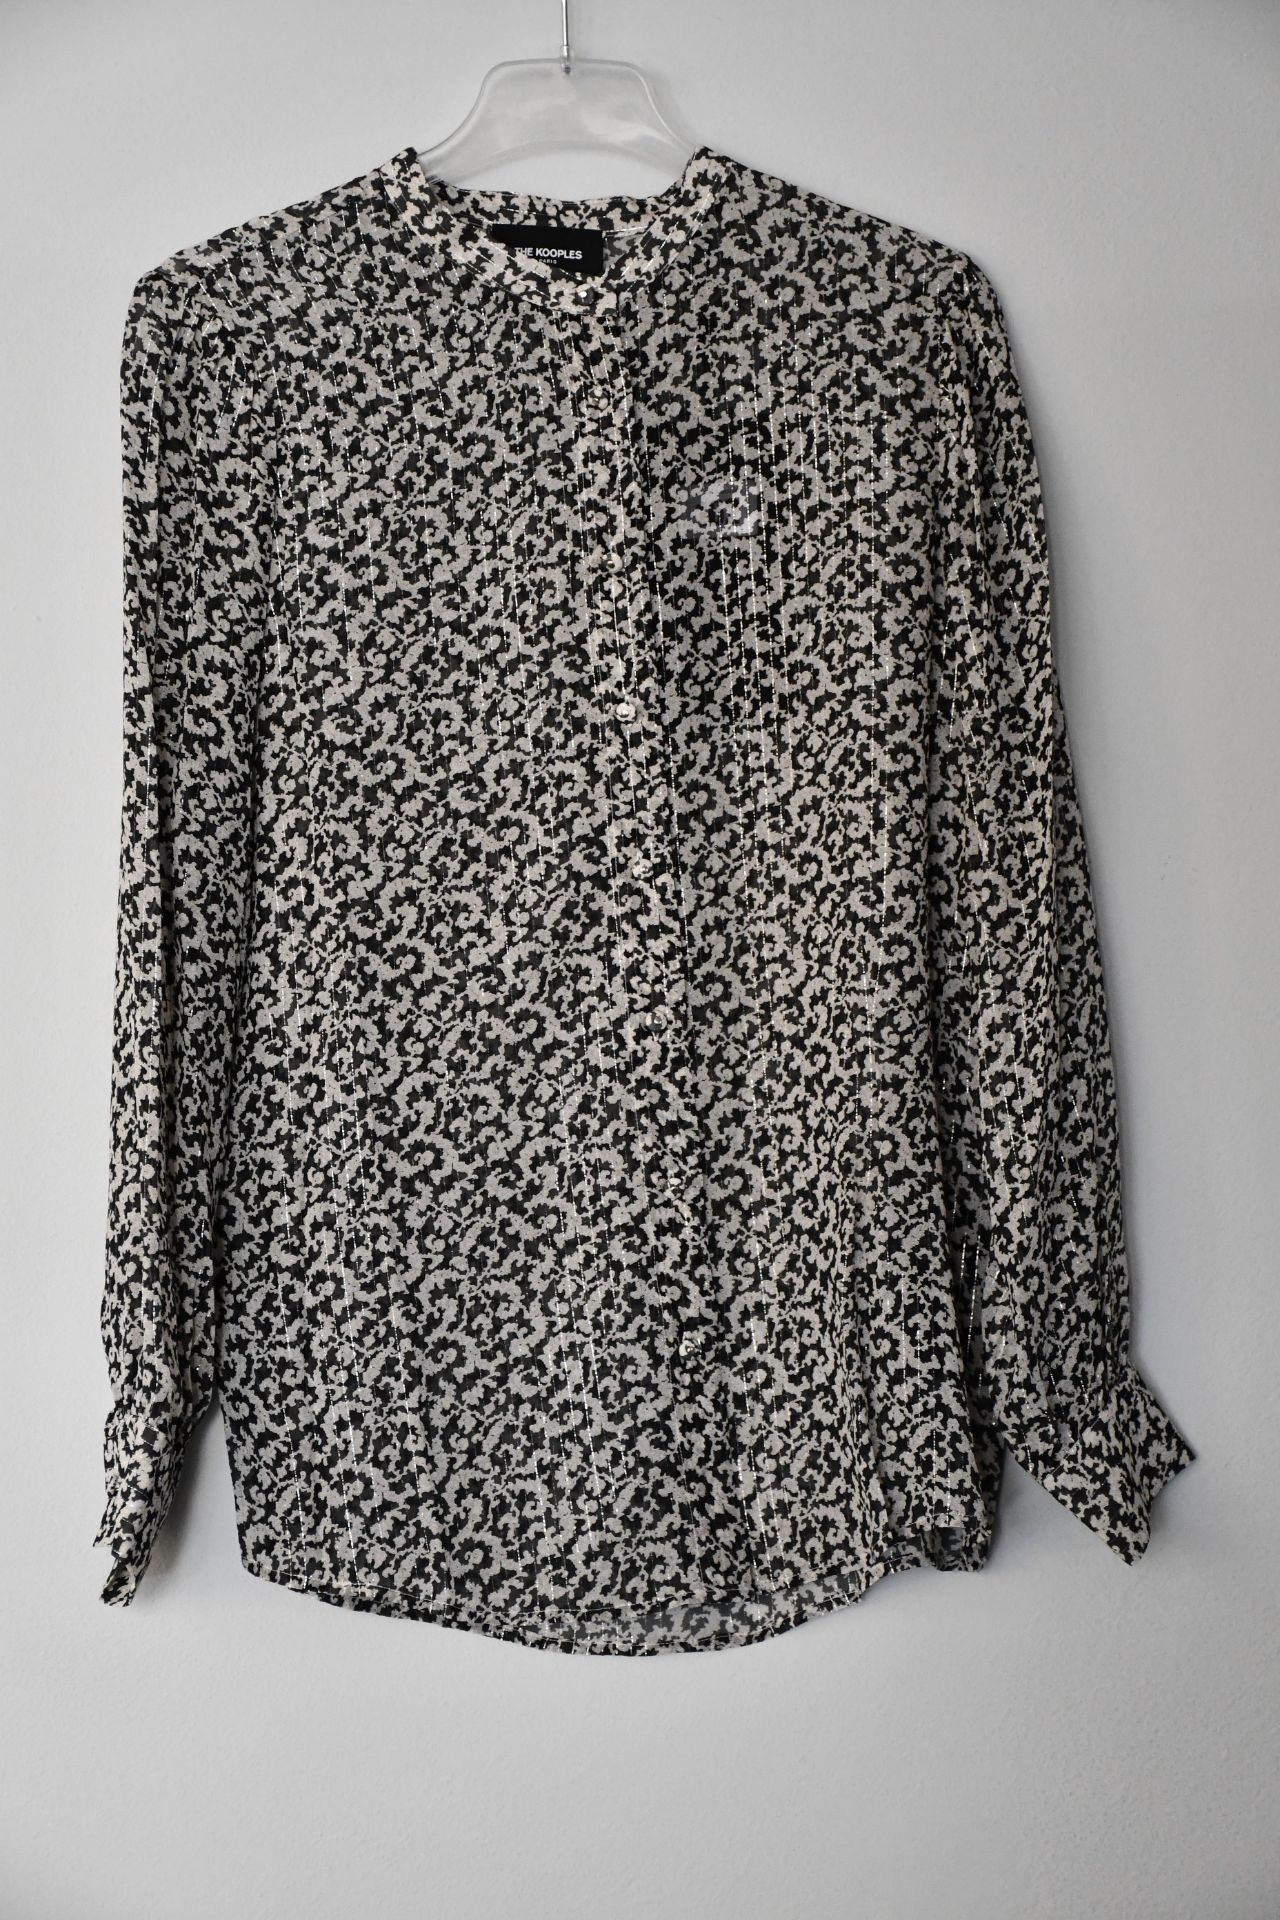 An as new The Kooples blouse (Size 2 - RRP €198).